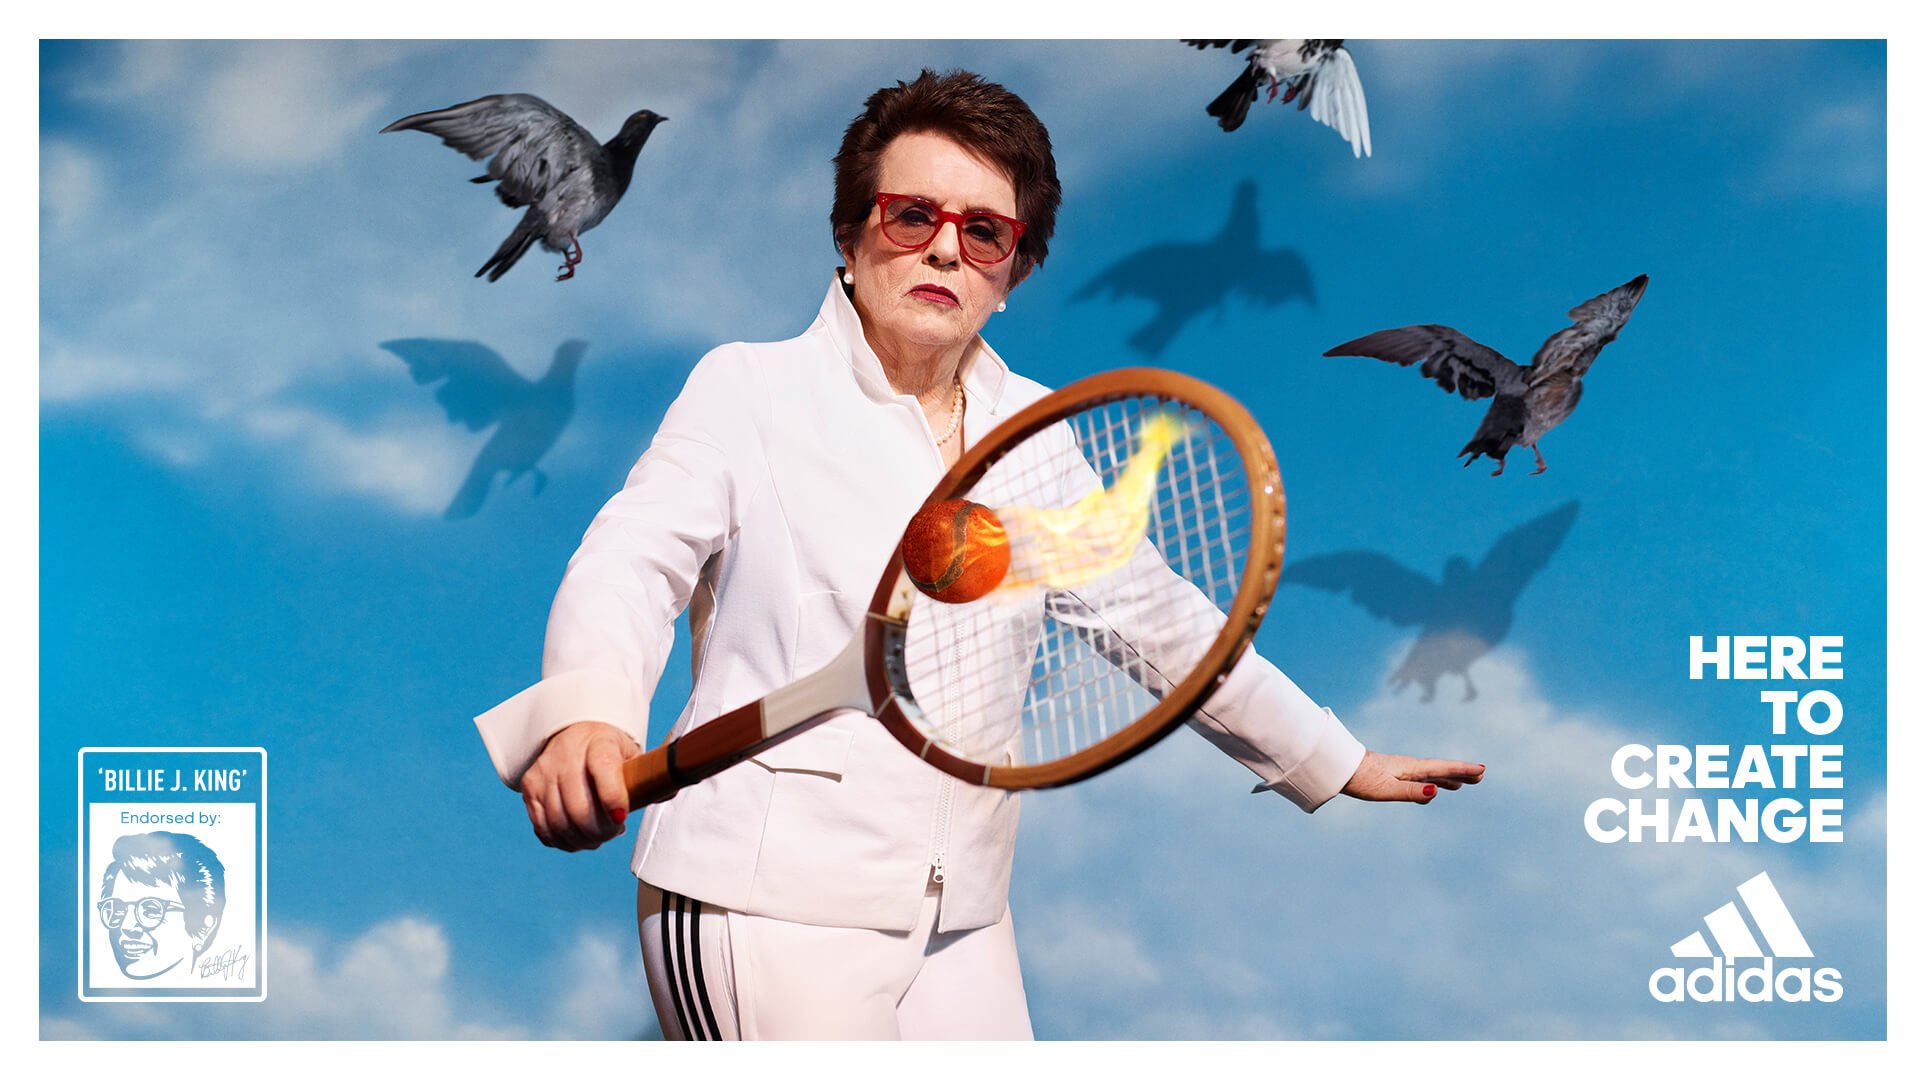 Adweek on Twitter: "Q4: Adidas struck marketing gold by putting '70s tennis trailblazer Billie Jean King front and center in its 2018 marketing. Which retired female athletes or sports figures would